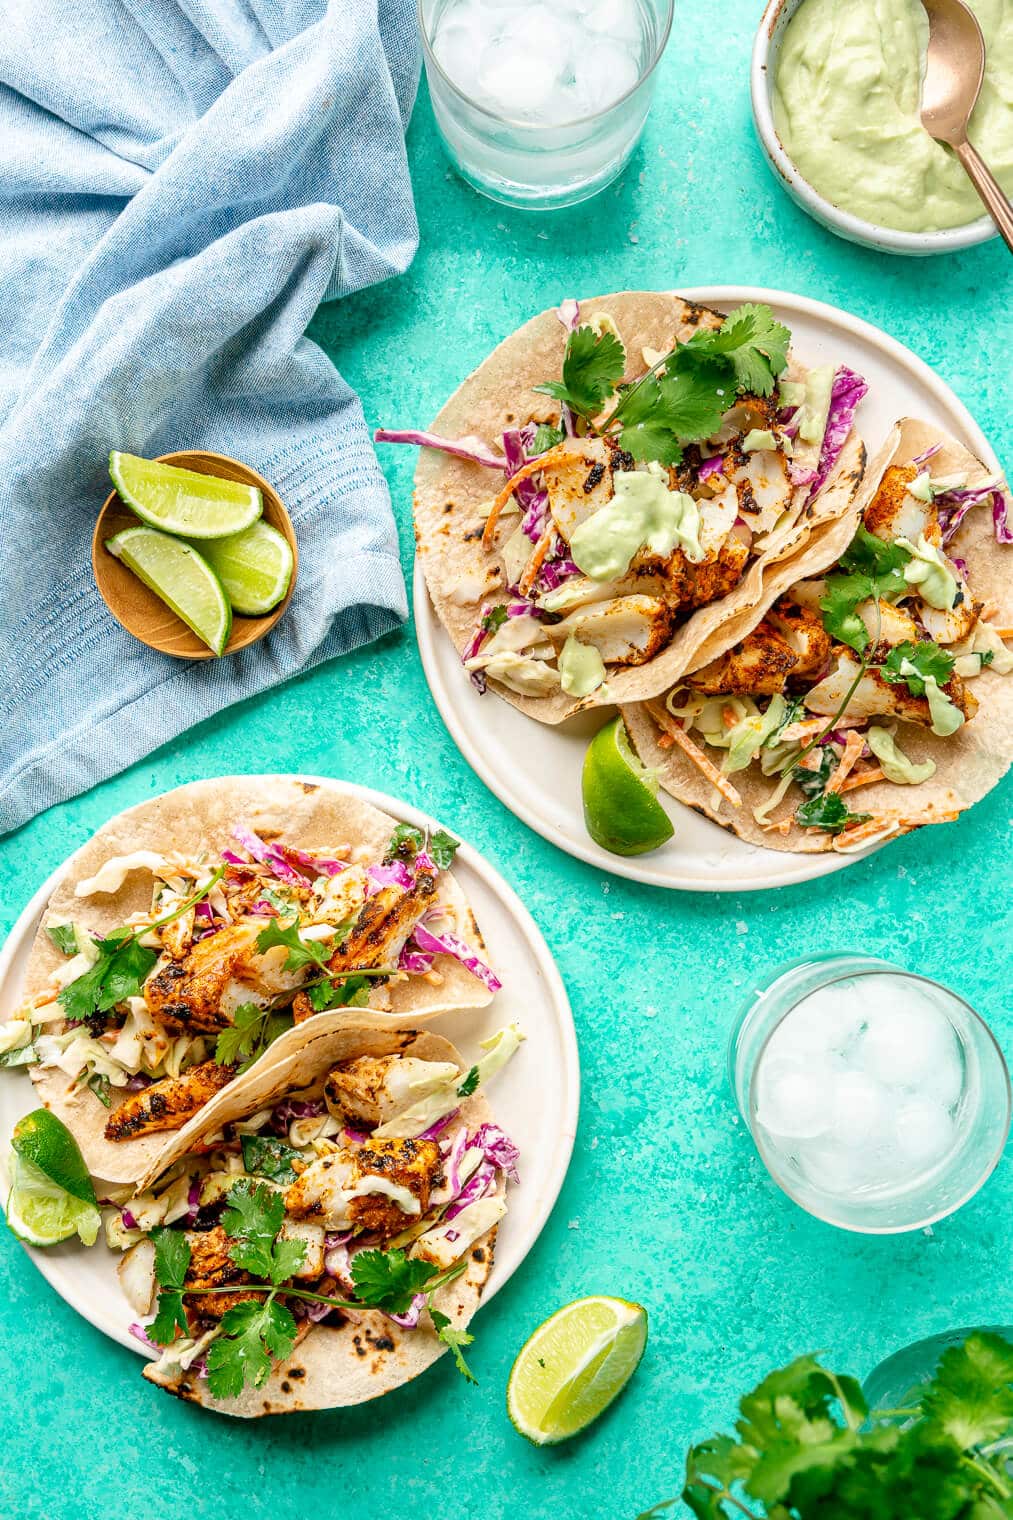 Two plates of blackened fish tacos on round plates garnished with cilantro and a lime wedge. The plates are on a teal surface with glasses of ice water and a light blue linen draped in the top right corner. There is a small, wooden serving bowl with lime wedges and a white bowl with avocado cream with a bronze spoon.